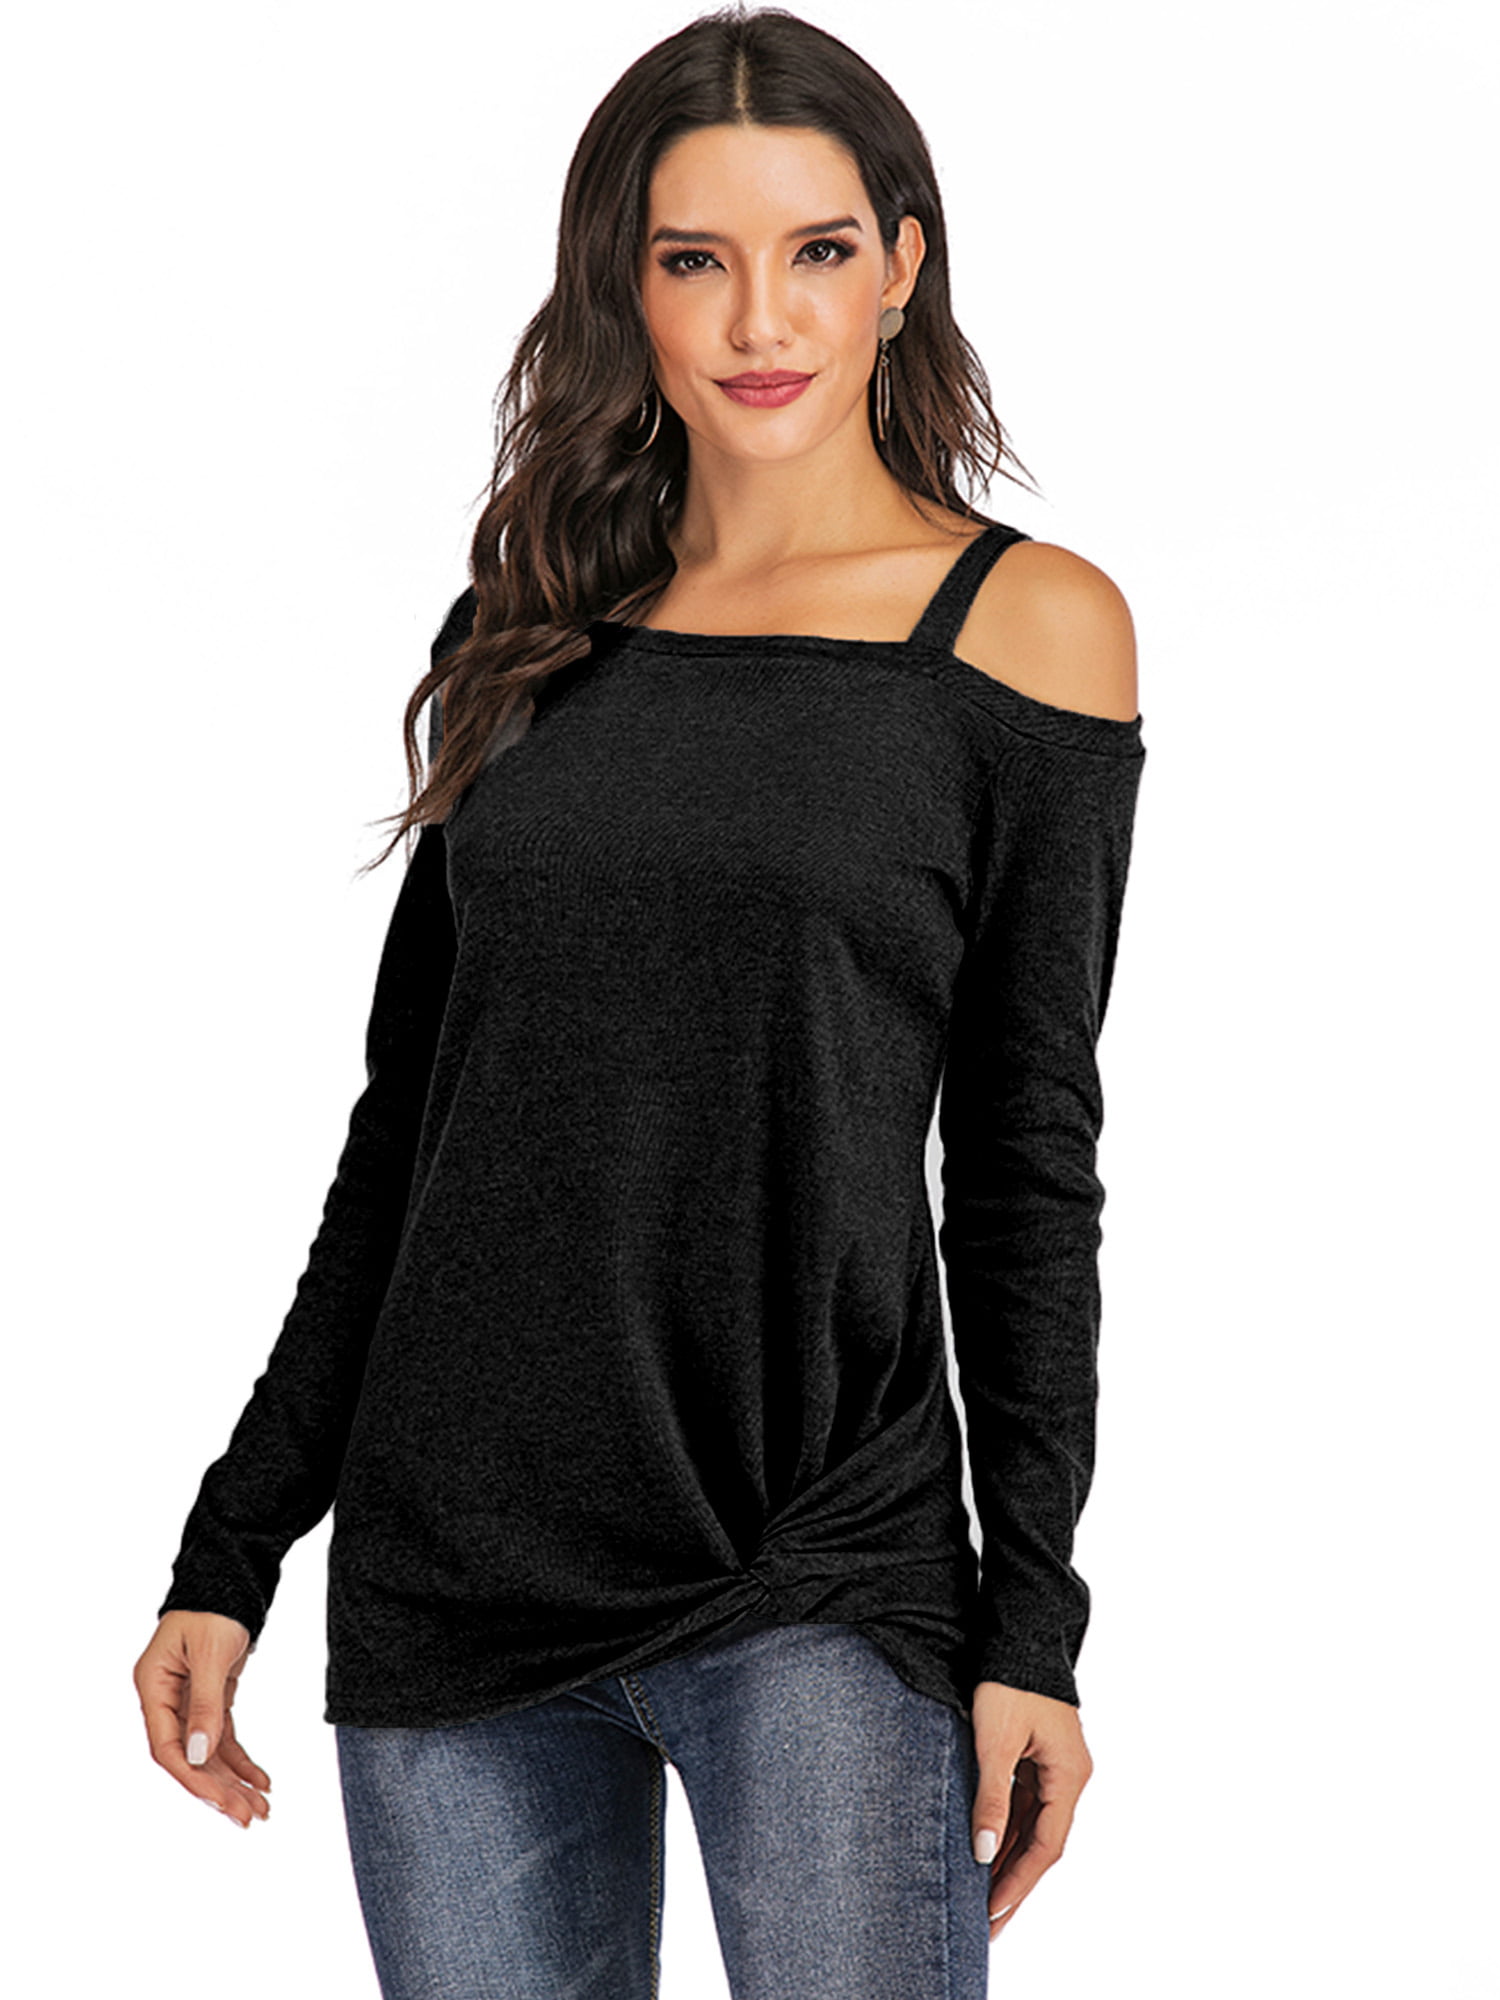 Womens Criss Cross Backless Loose Shirts Long Sleeve Cold Shoulder Tunic Blouses Tops 